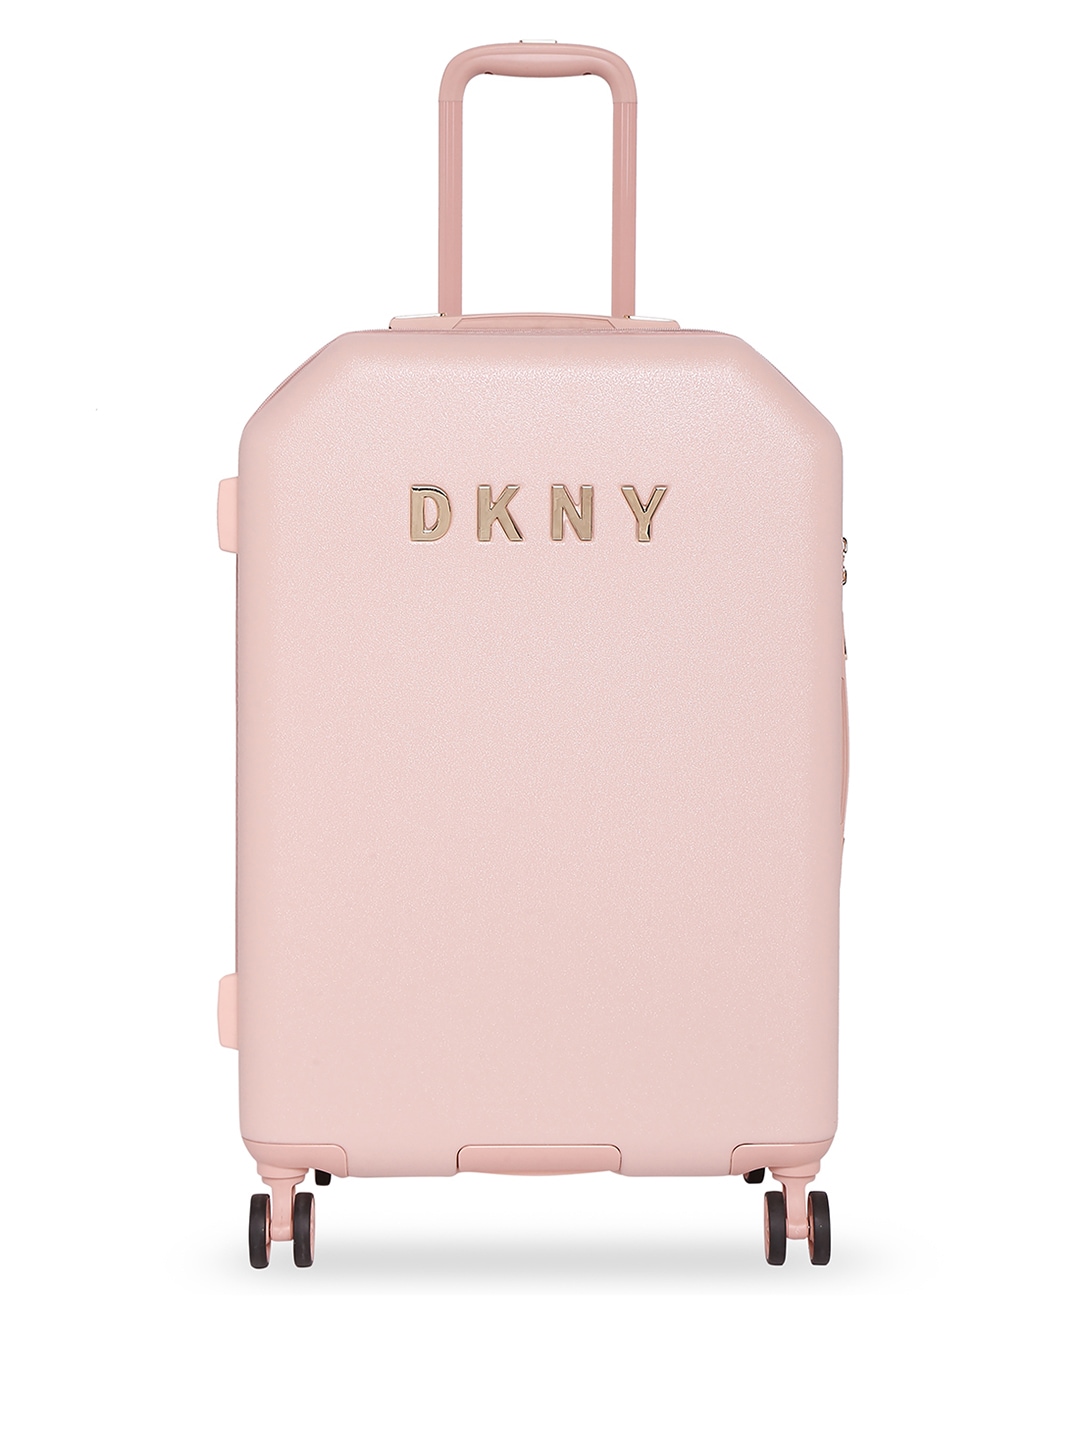 DKNY ALLORE Pink Textured Allore Hard-Sided Cabin Trolley Suitcase Price in India